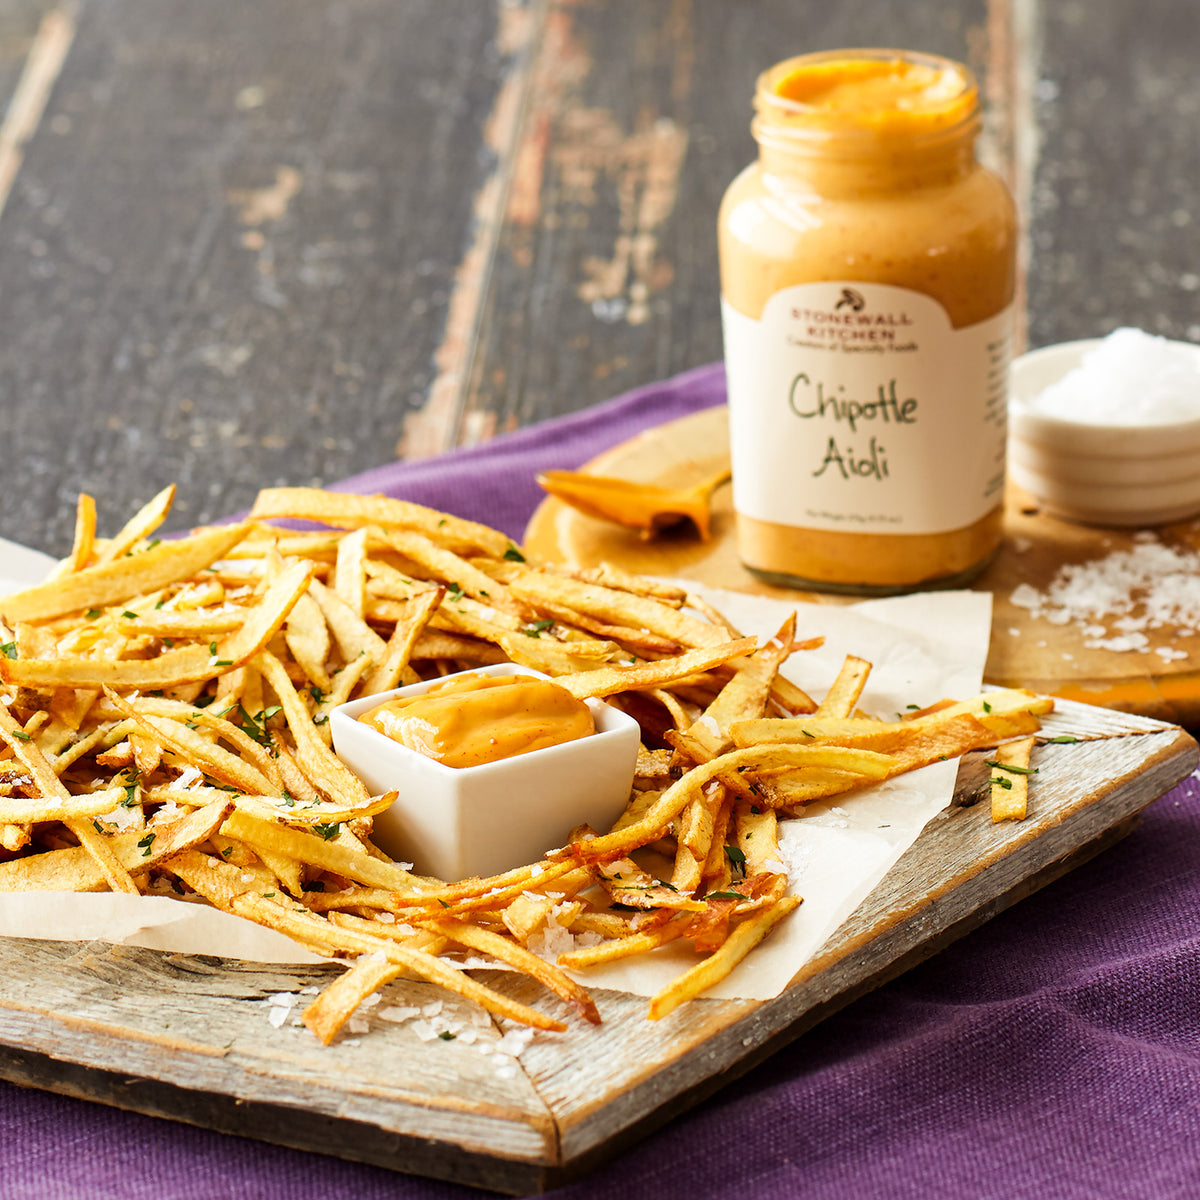 photo is a plate of french fries with a bowl of Stonewall Kitchen Chipotle Aioli for dipping